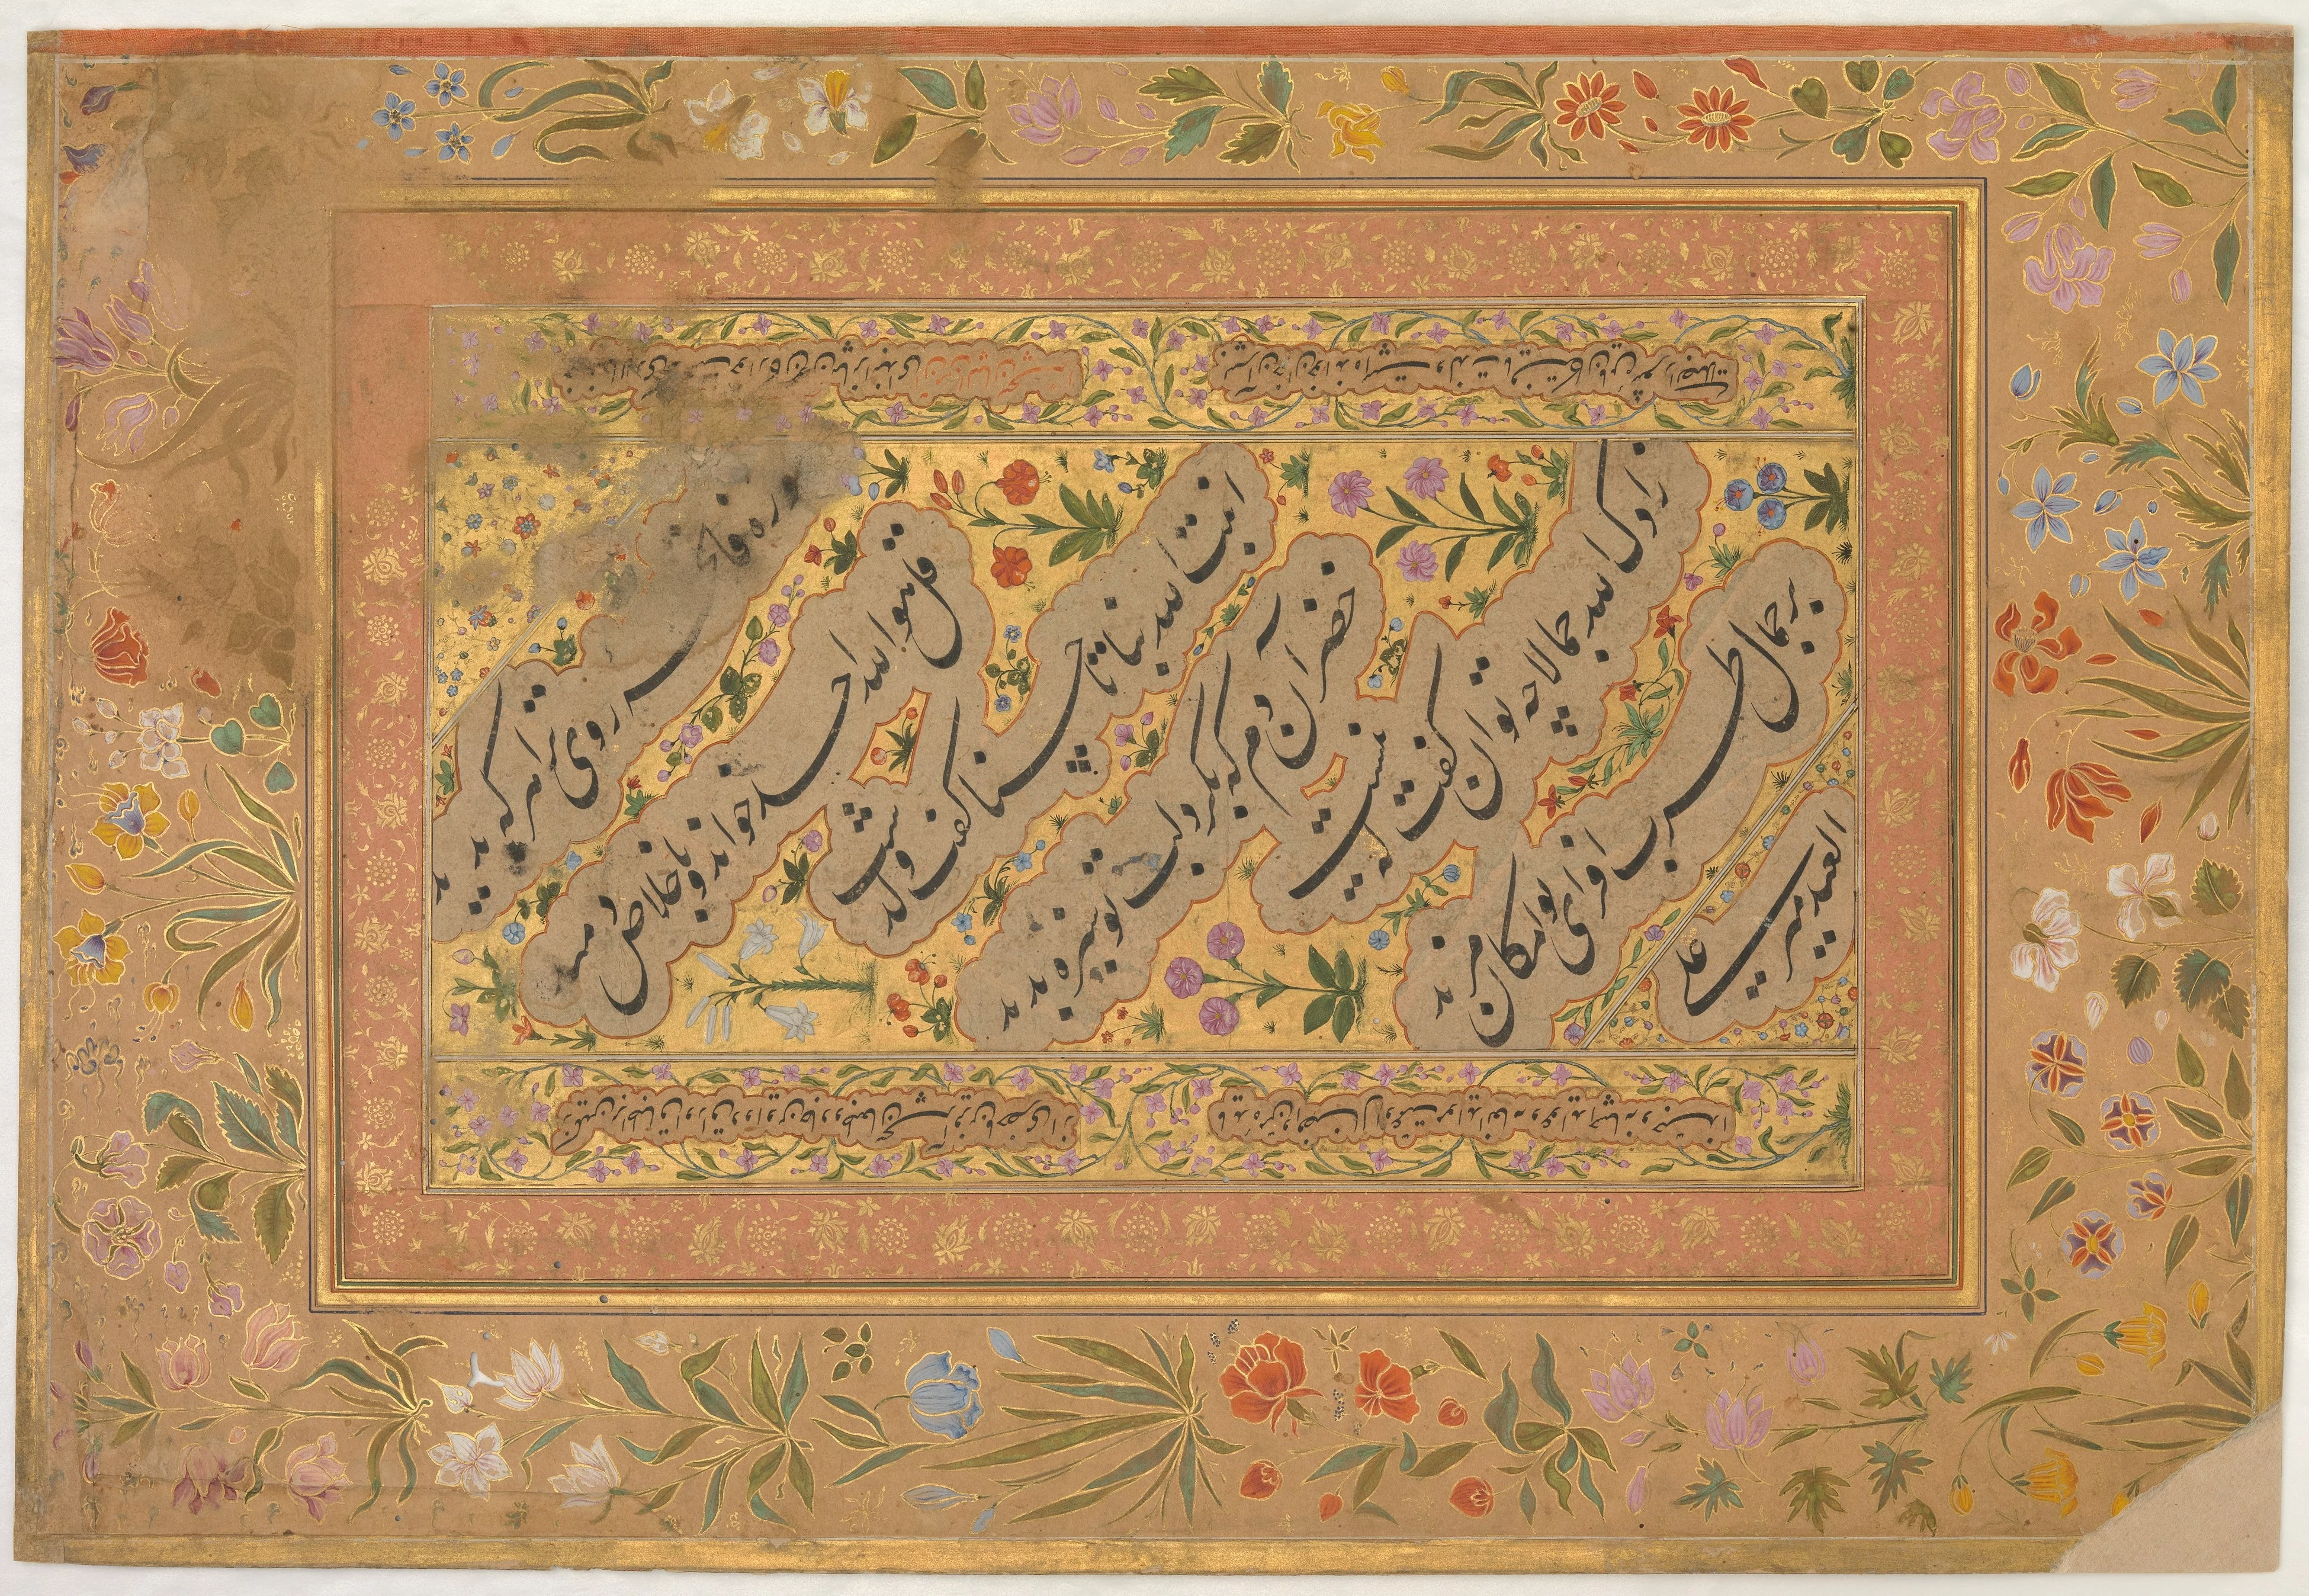 Naturalistic Influence on Mughal Miniature Painting